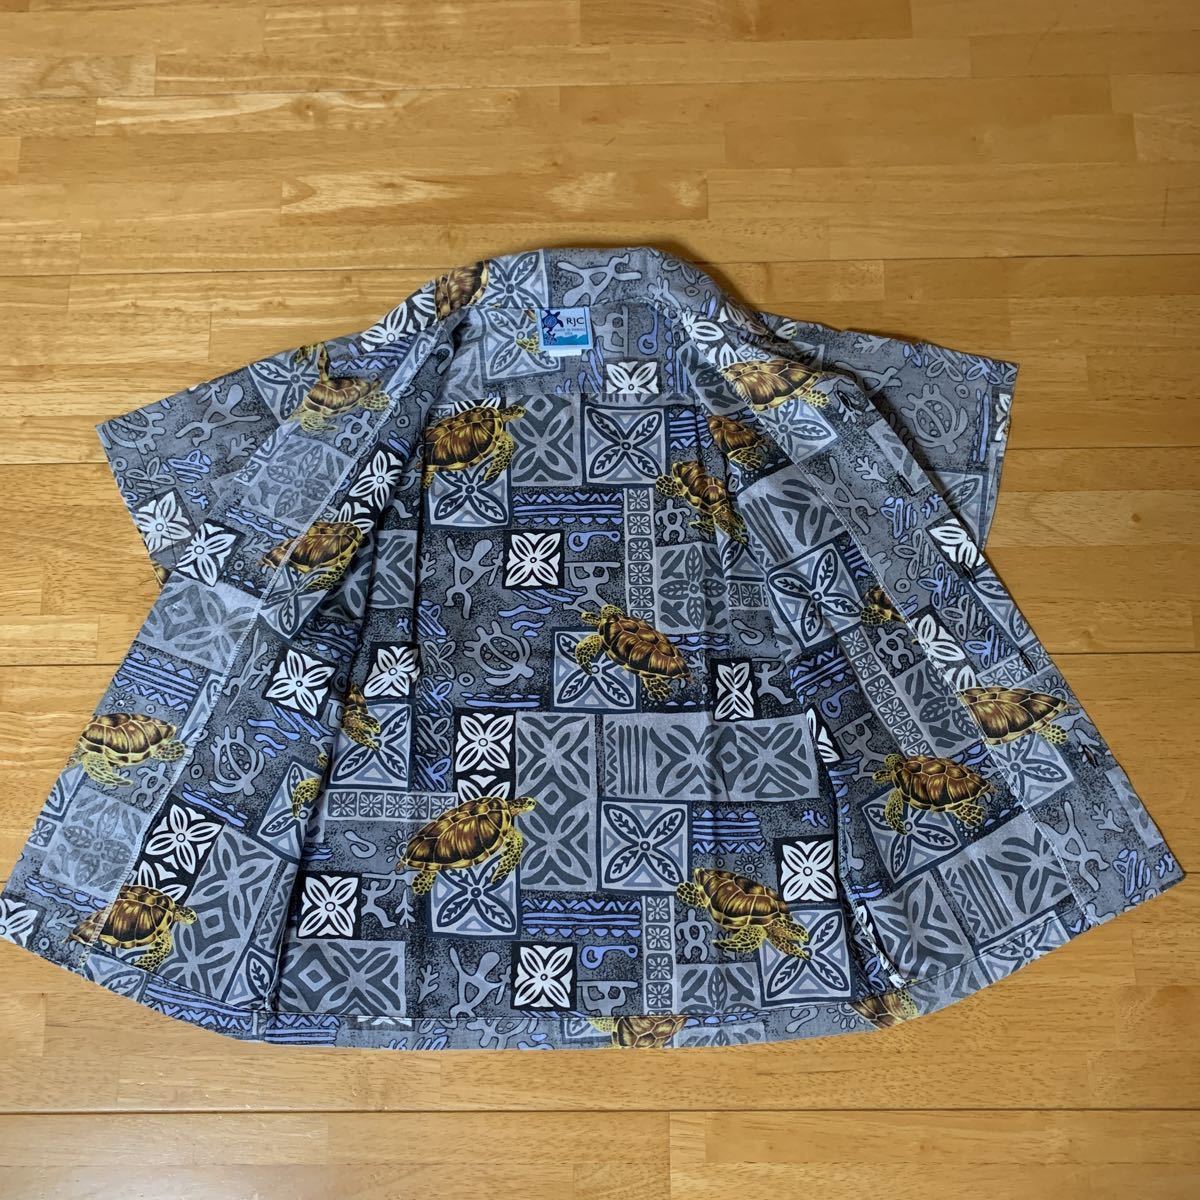  clothes Hawaii RJC aloha shirt gray & turtle pattern for children 140 secondhand goods free shipping 